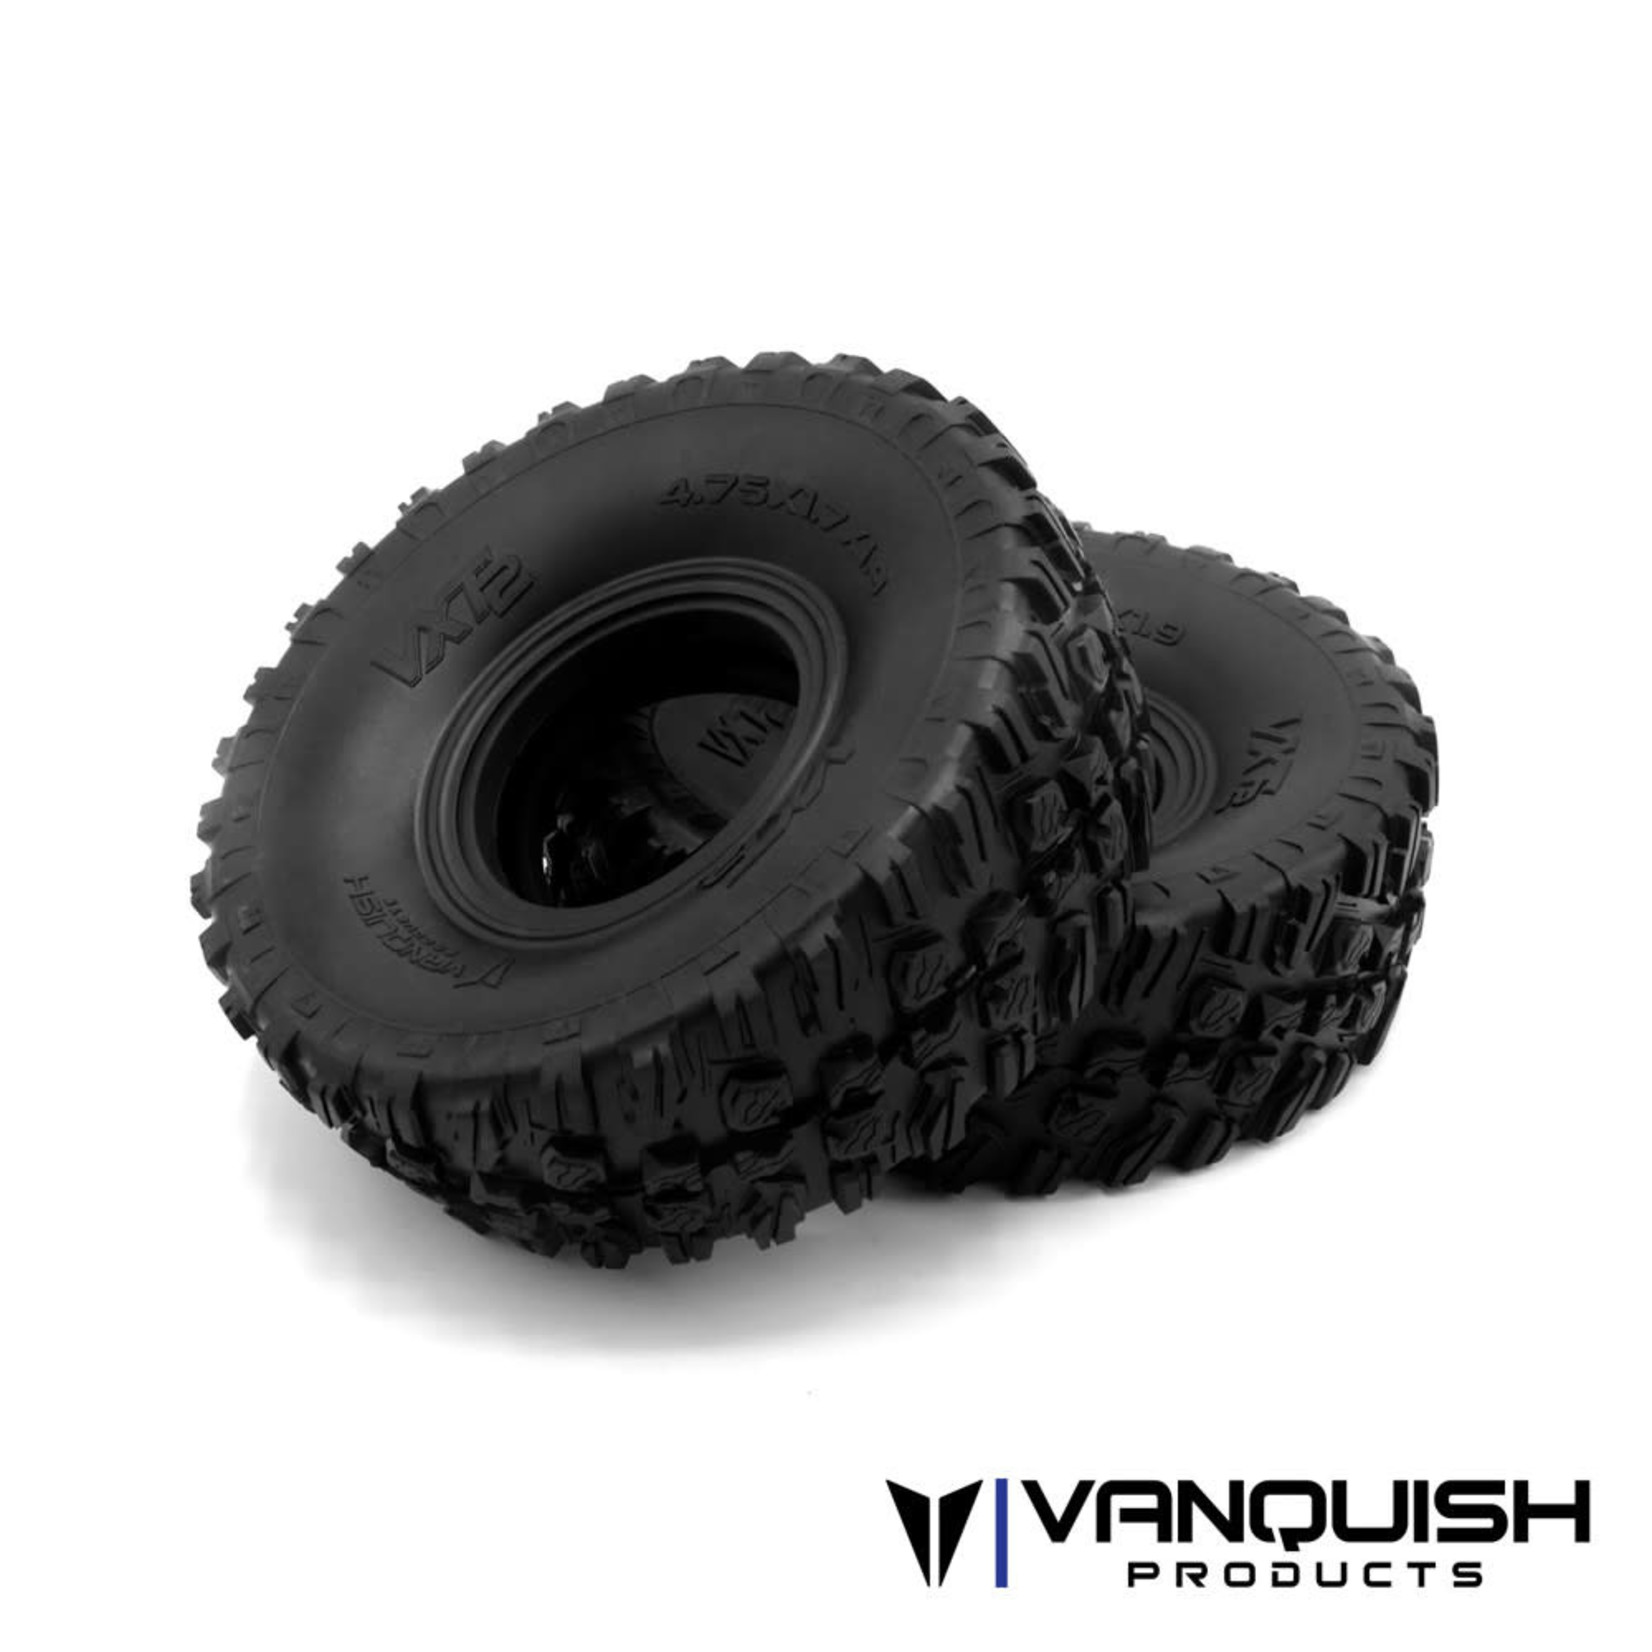 Vanquish Products Vanquish Products VXT2 1.9" Rock Crawler Tires (2) (Red) #VPS10102